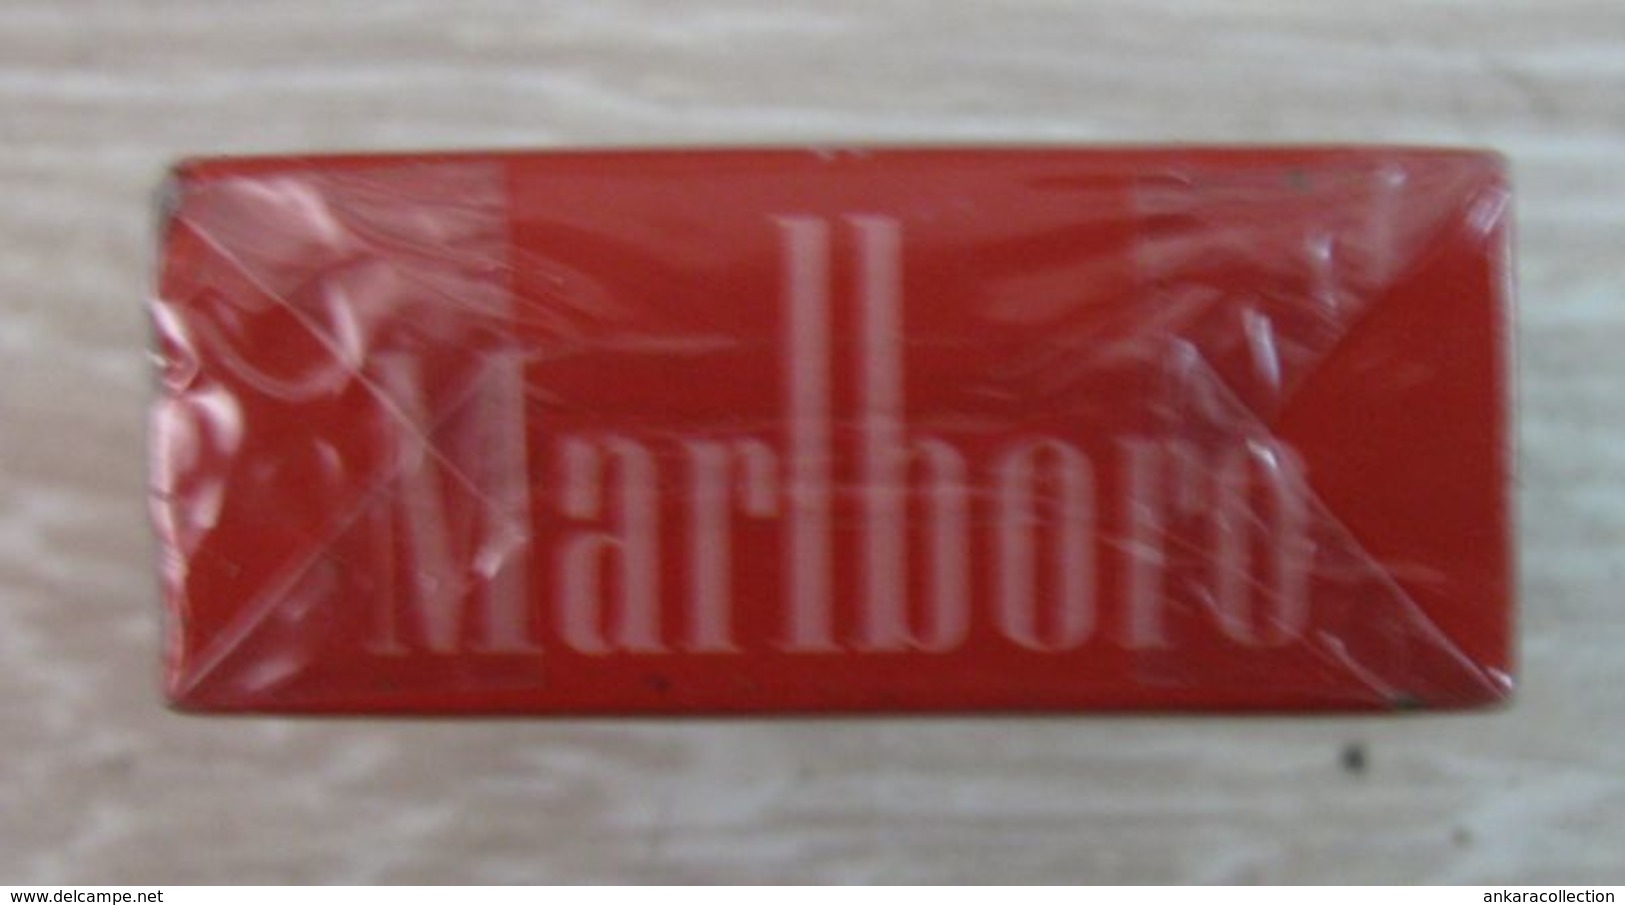 AC -  MARLBORO AMERICAN HARD PACKED EMPTY BOX FOR COLLECTION